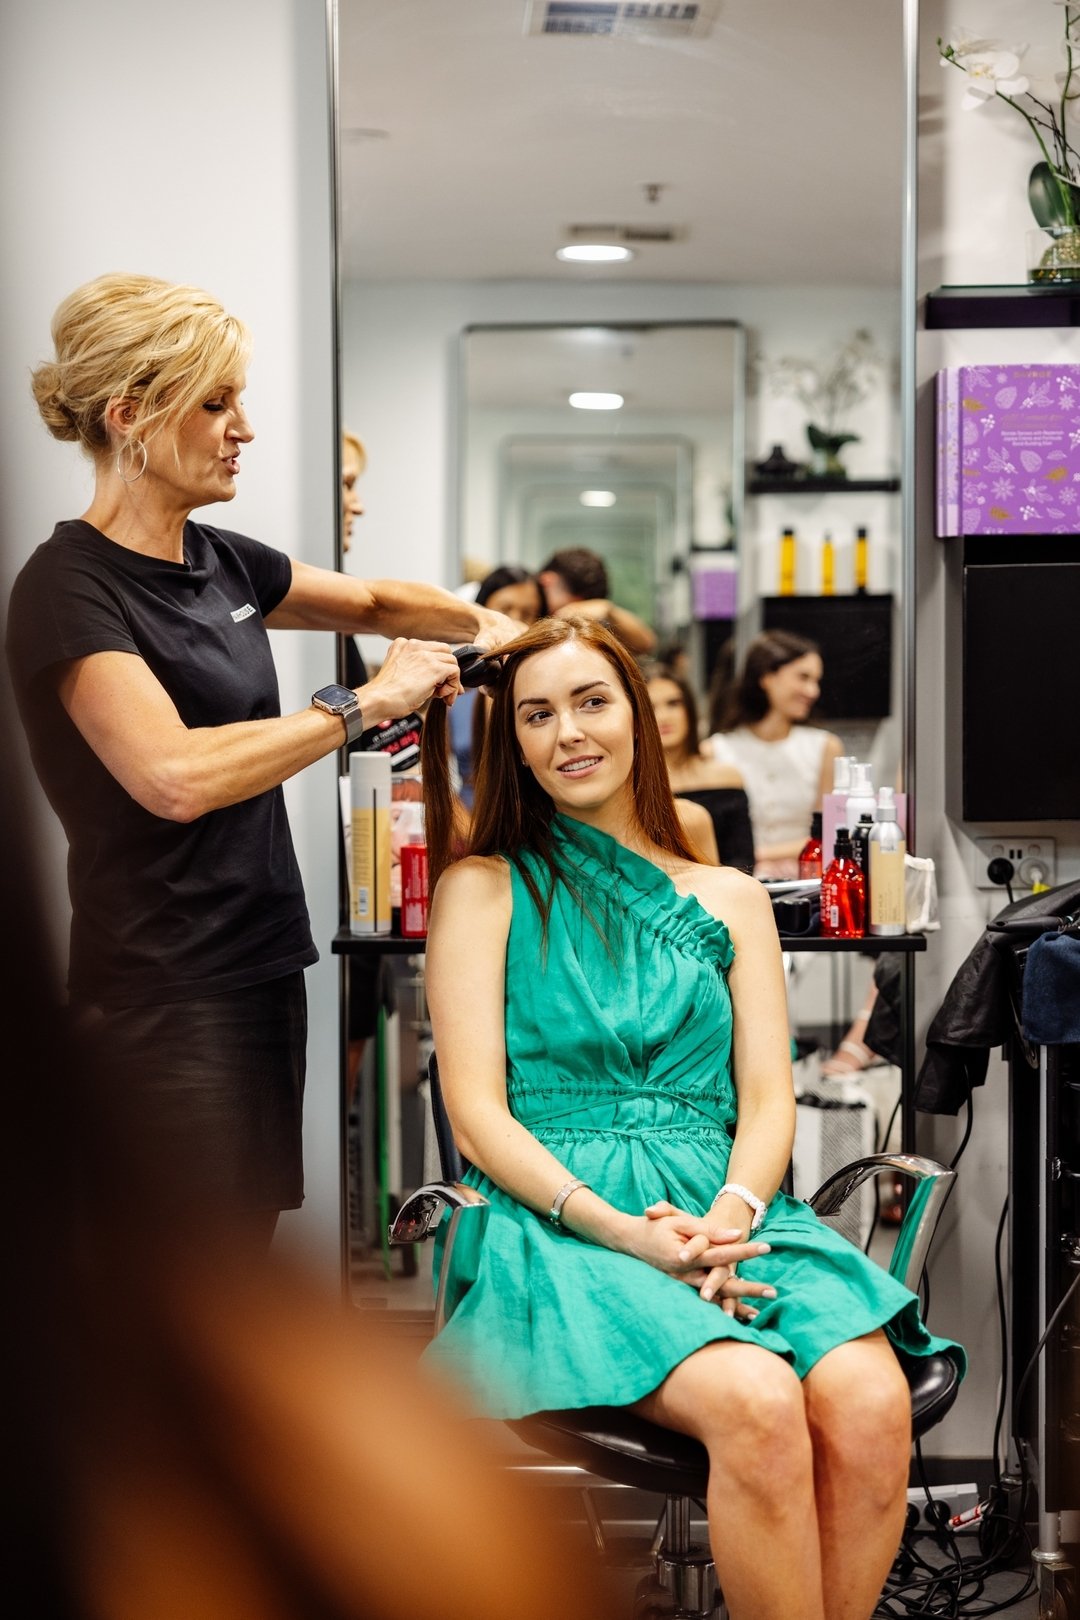 @hairhouseaustralia at the SA Hair Workshop, explaining how to achieve shiny straight hair 💚🙌🏽

Miss Universe Australia is Proudly Presented by; @boldly.foods &amp; @ozwear_au_official
Education &amp; Business Grant Partner; @northsiderentals
Cosm